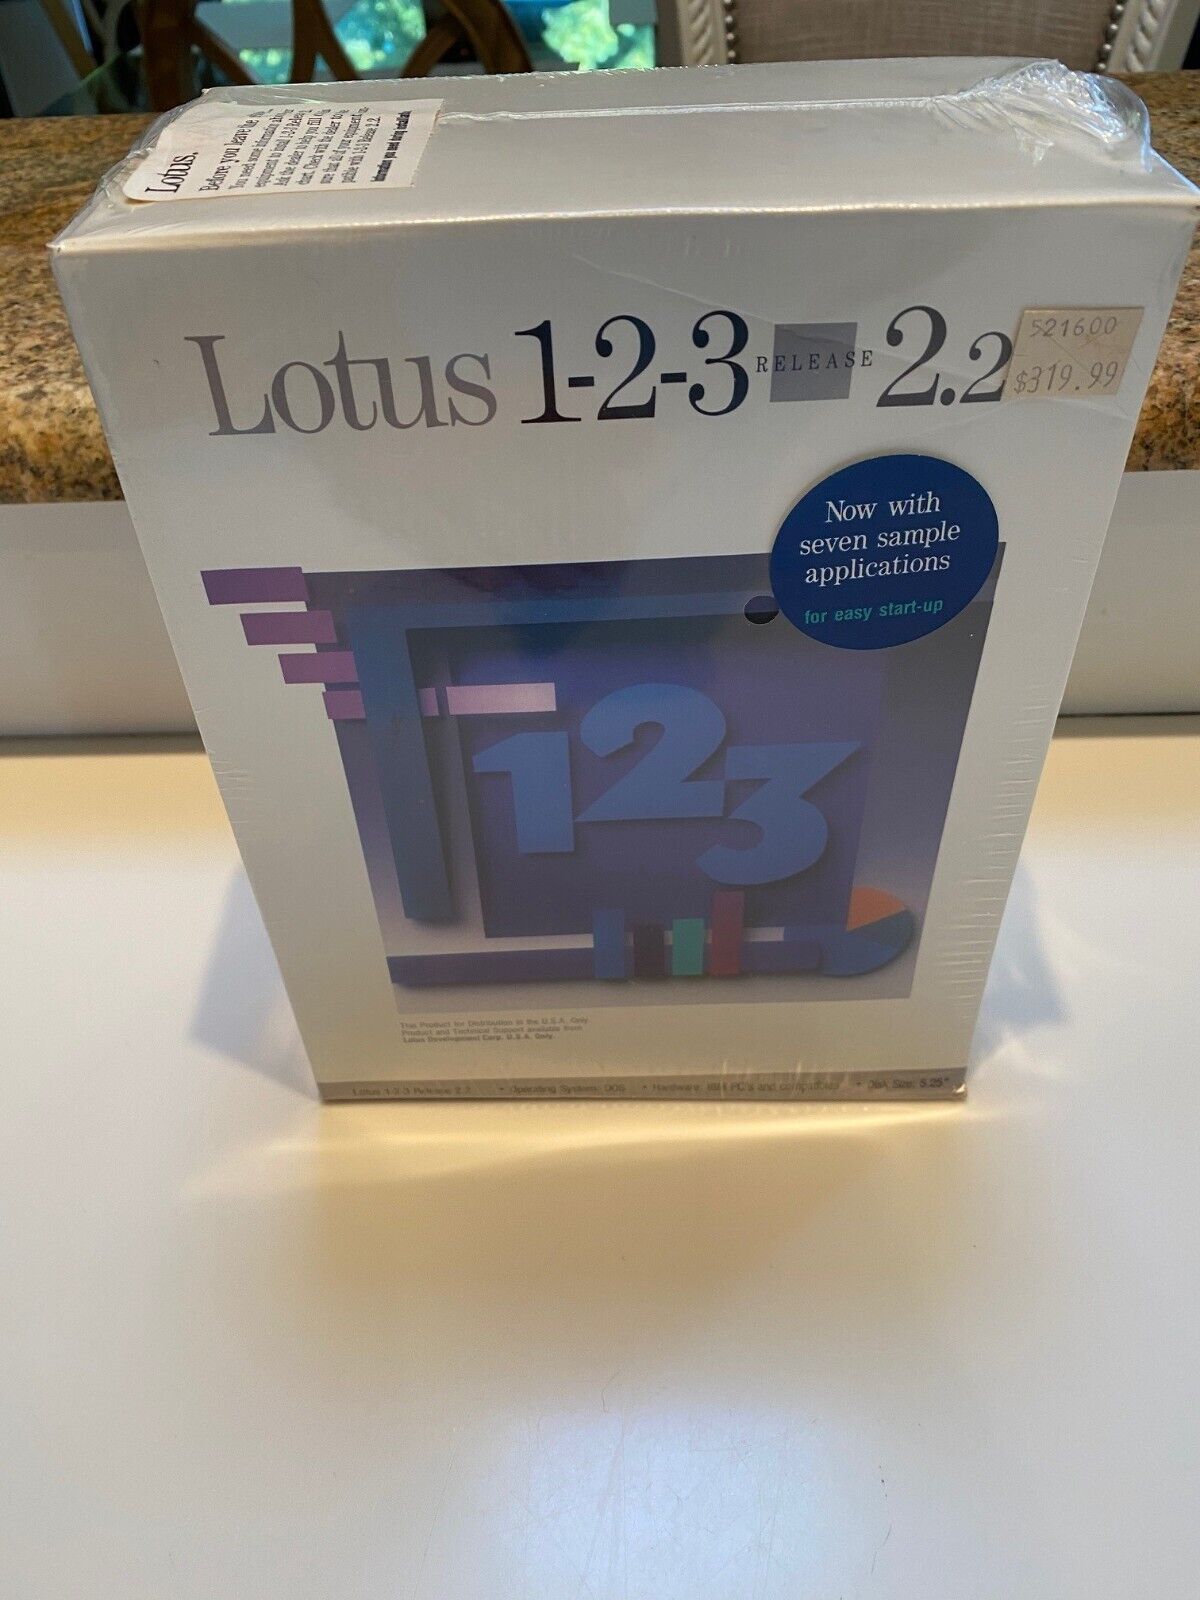 LOTUS 1-2-3 Release 2.2 Brand New Sealed Spreadsheet Software Vintage Rare 5.25